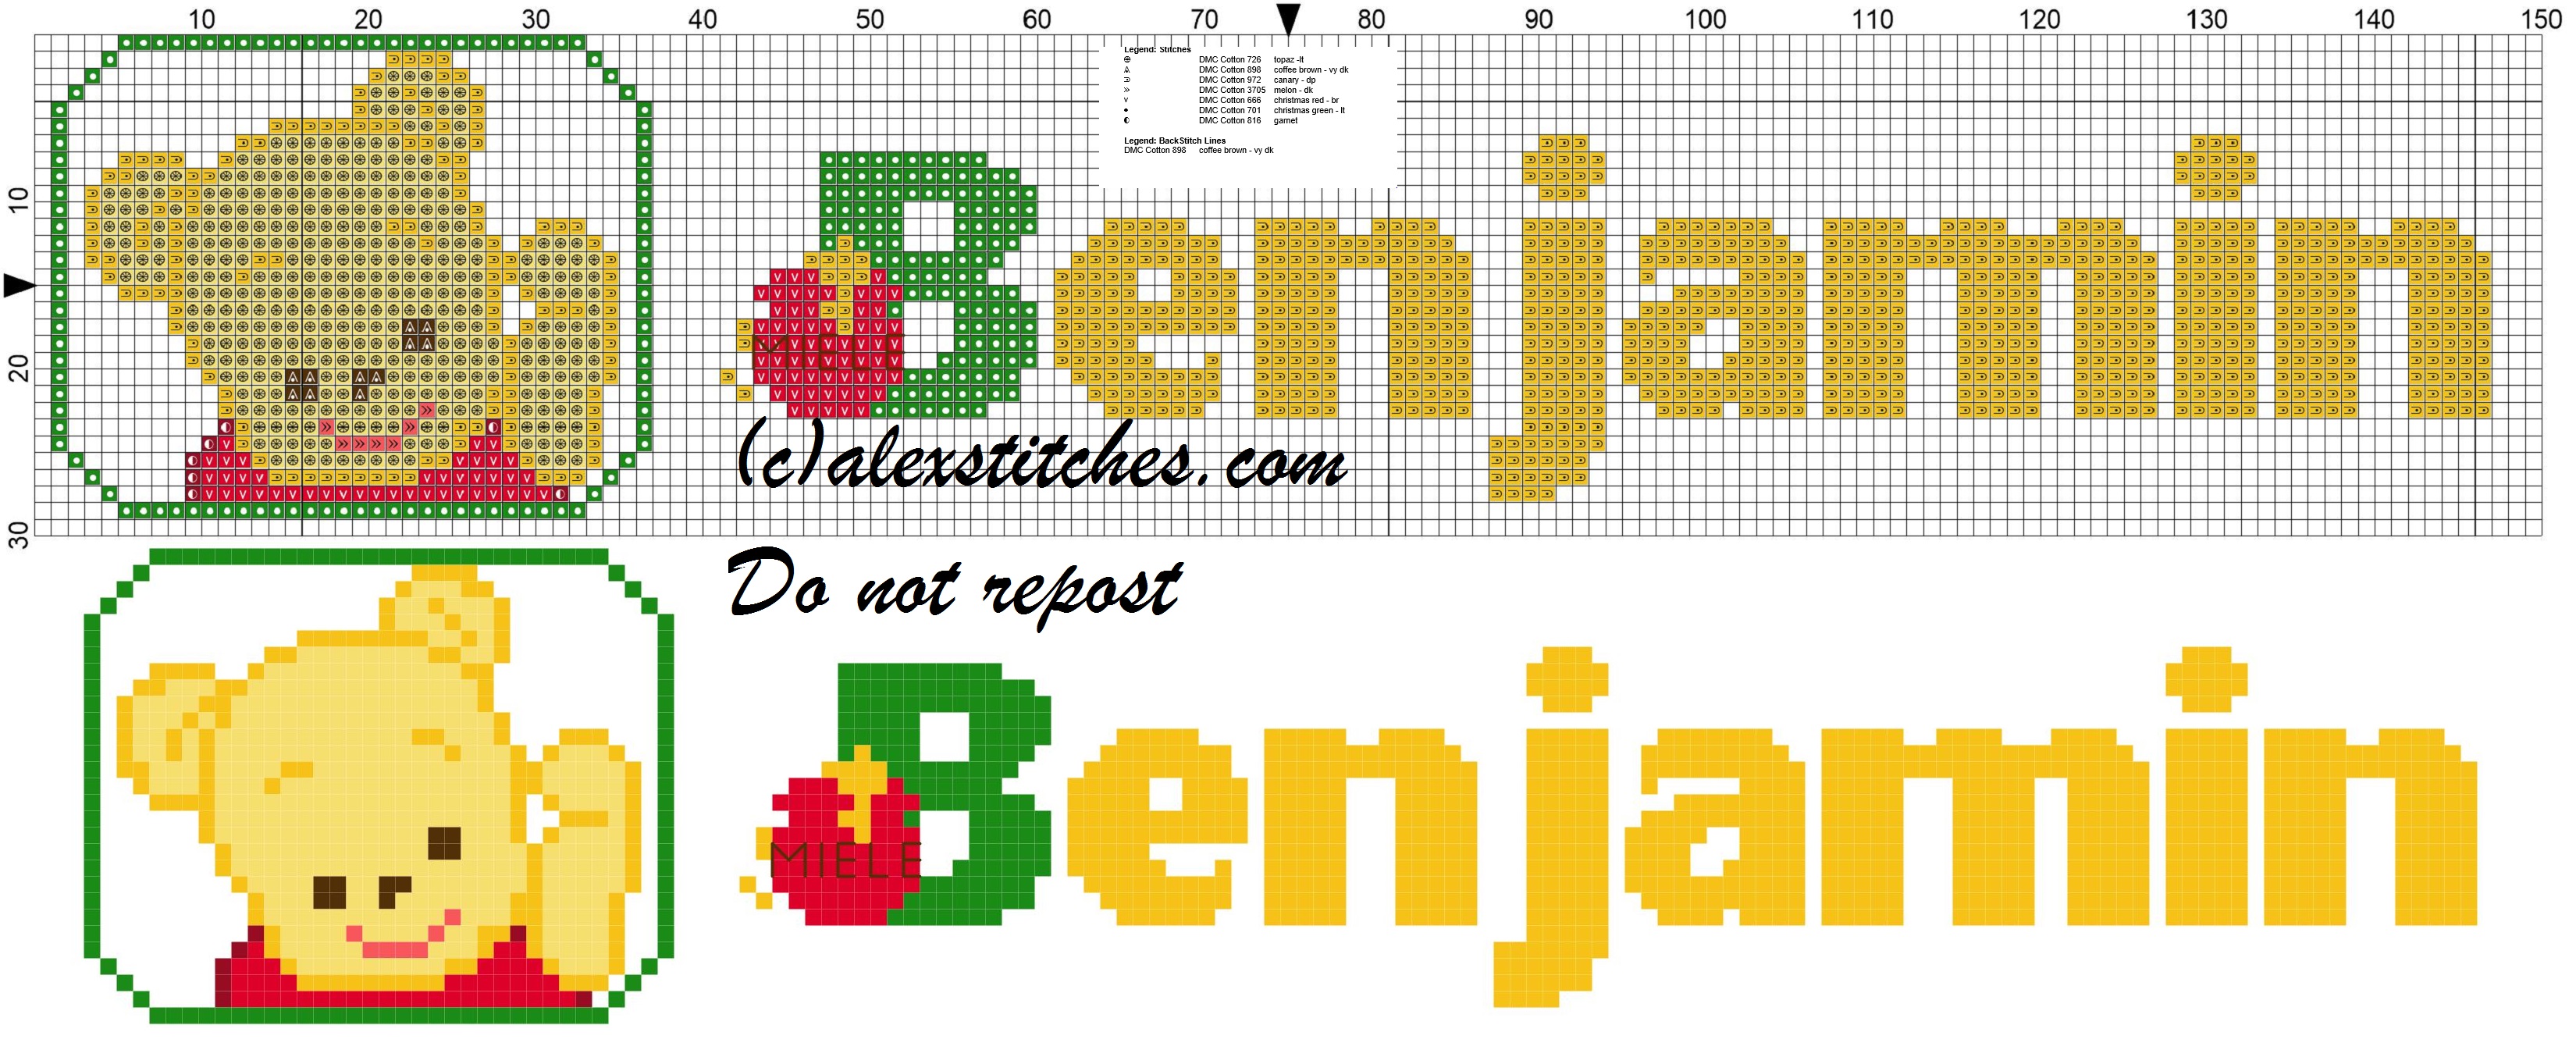 Benjamin name with Baby winnie the pooh free cross stitches pattern